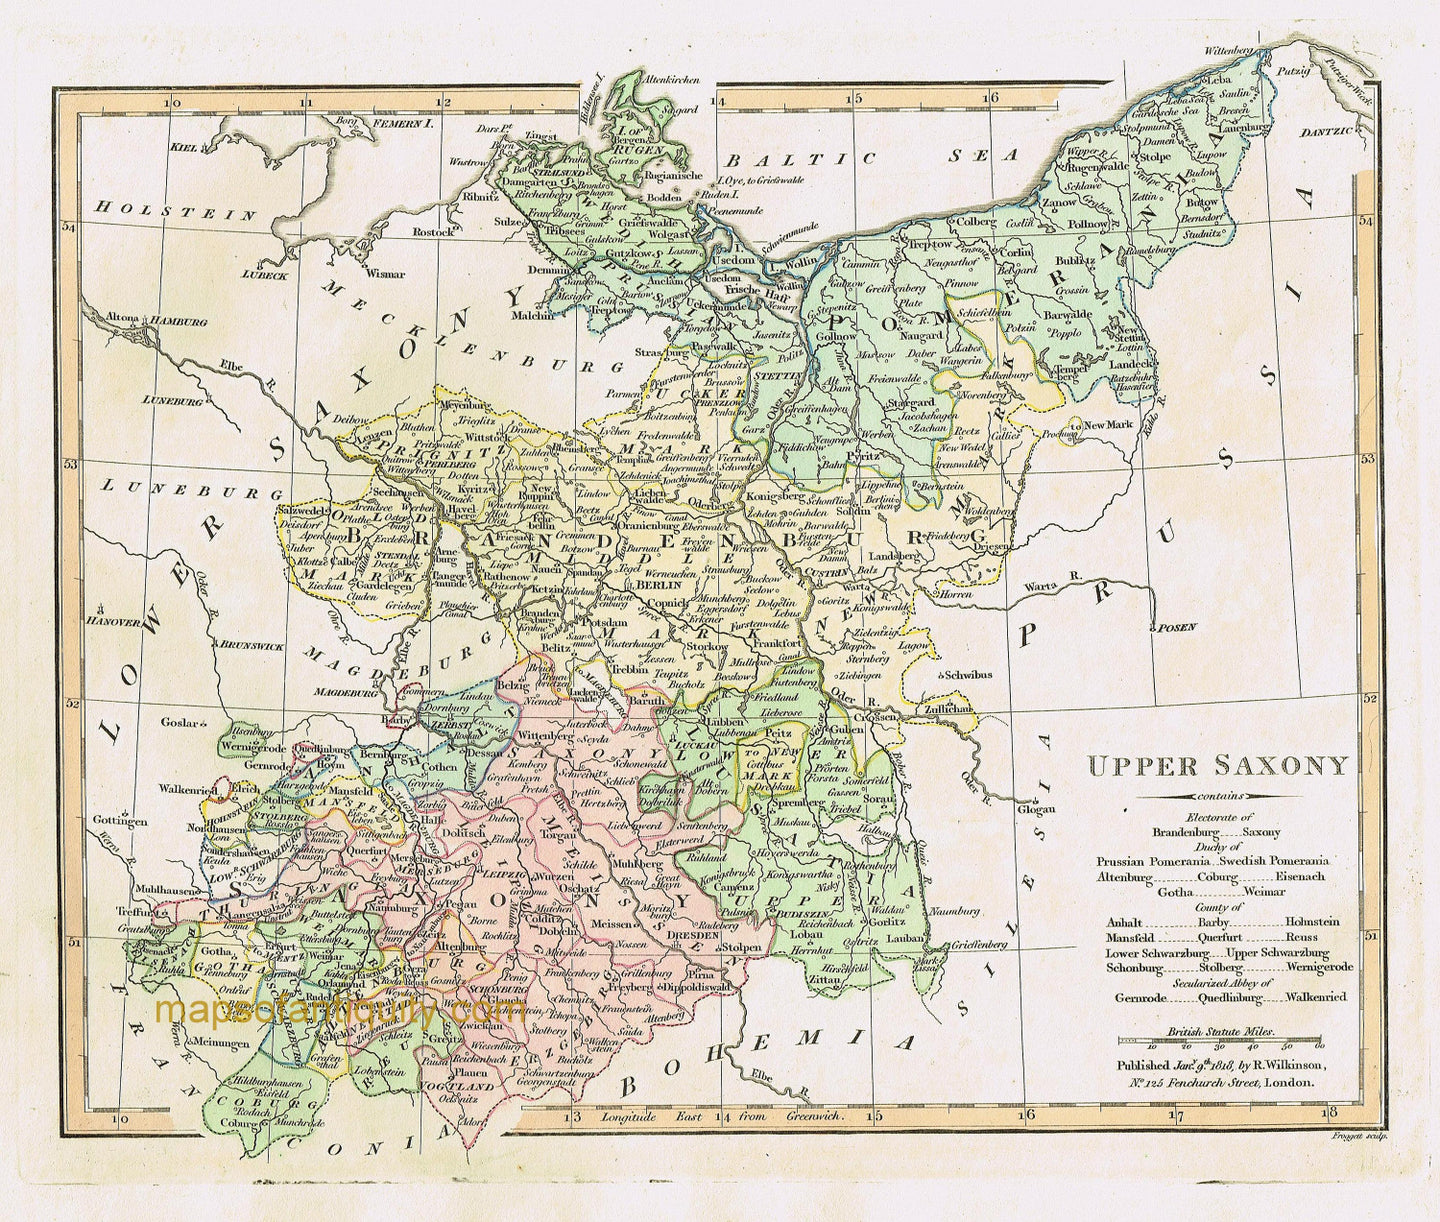 Antique-Hand-Colored-Map-Upper-Saxony-now-parts-of-Germany-and-Poland-Europe-Germany-1827-Wilkinson-Maps-Of-Antiquity